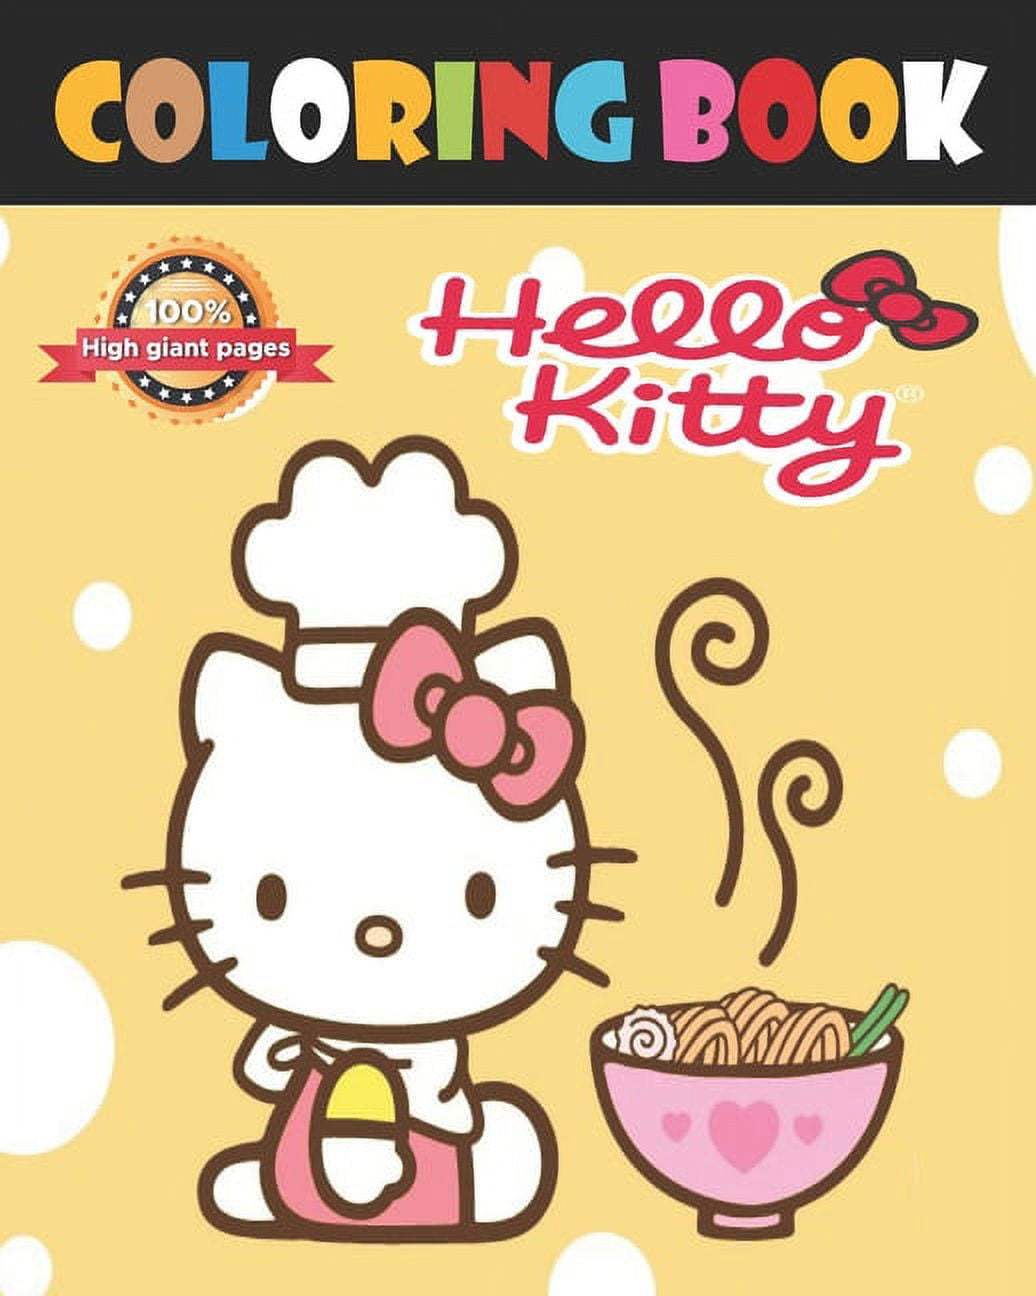 Hello Kitty & Friends Coloring Book (Paperback)